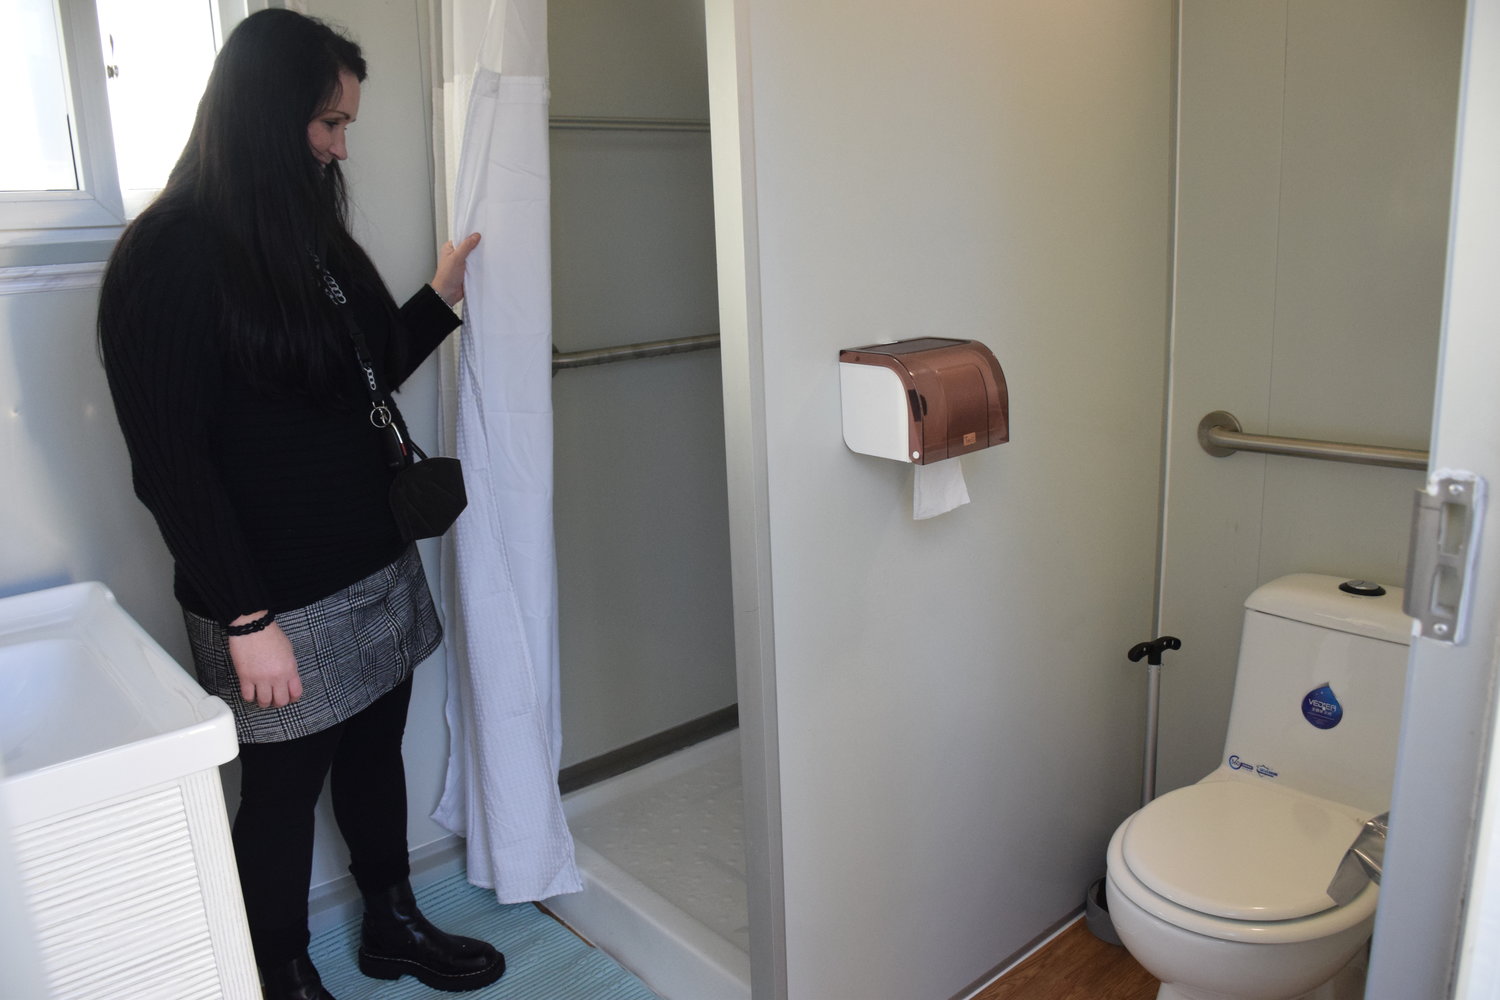 Battle Ground Deputy Mayor Cherish DesRochers speaks about the amenities located in a “shower pod” installed at Immanuel Lutheran Church in Vancouver.